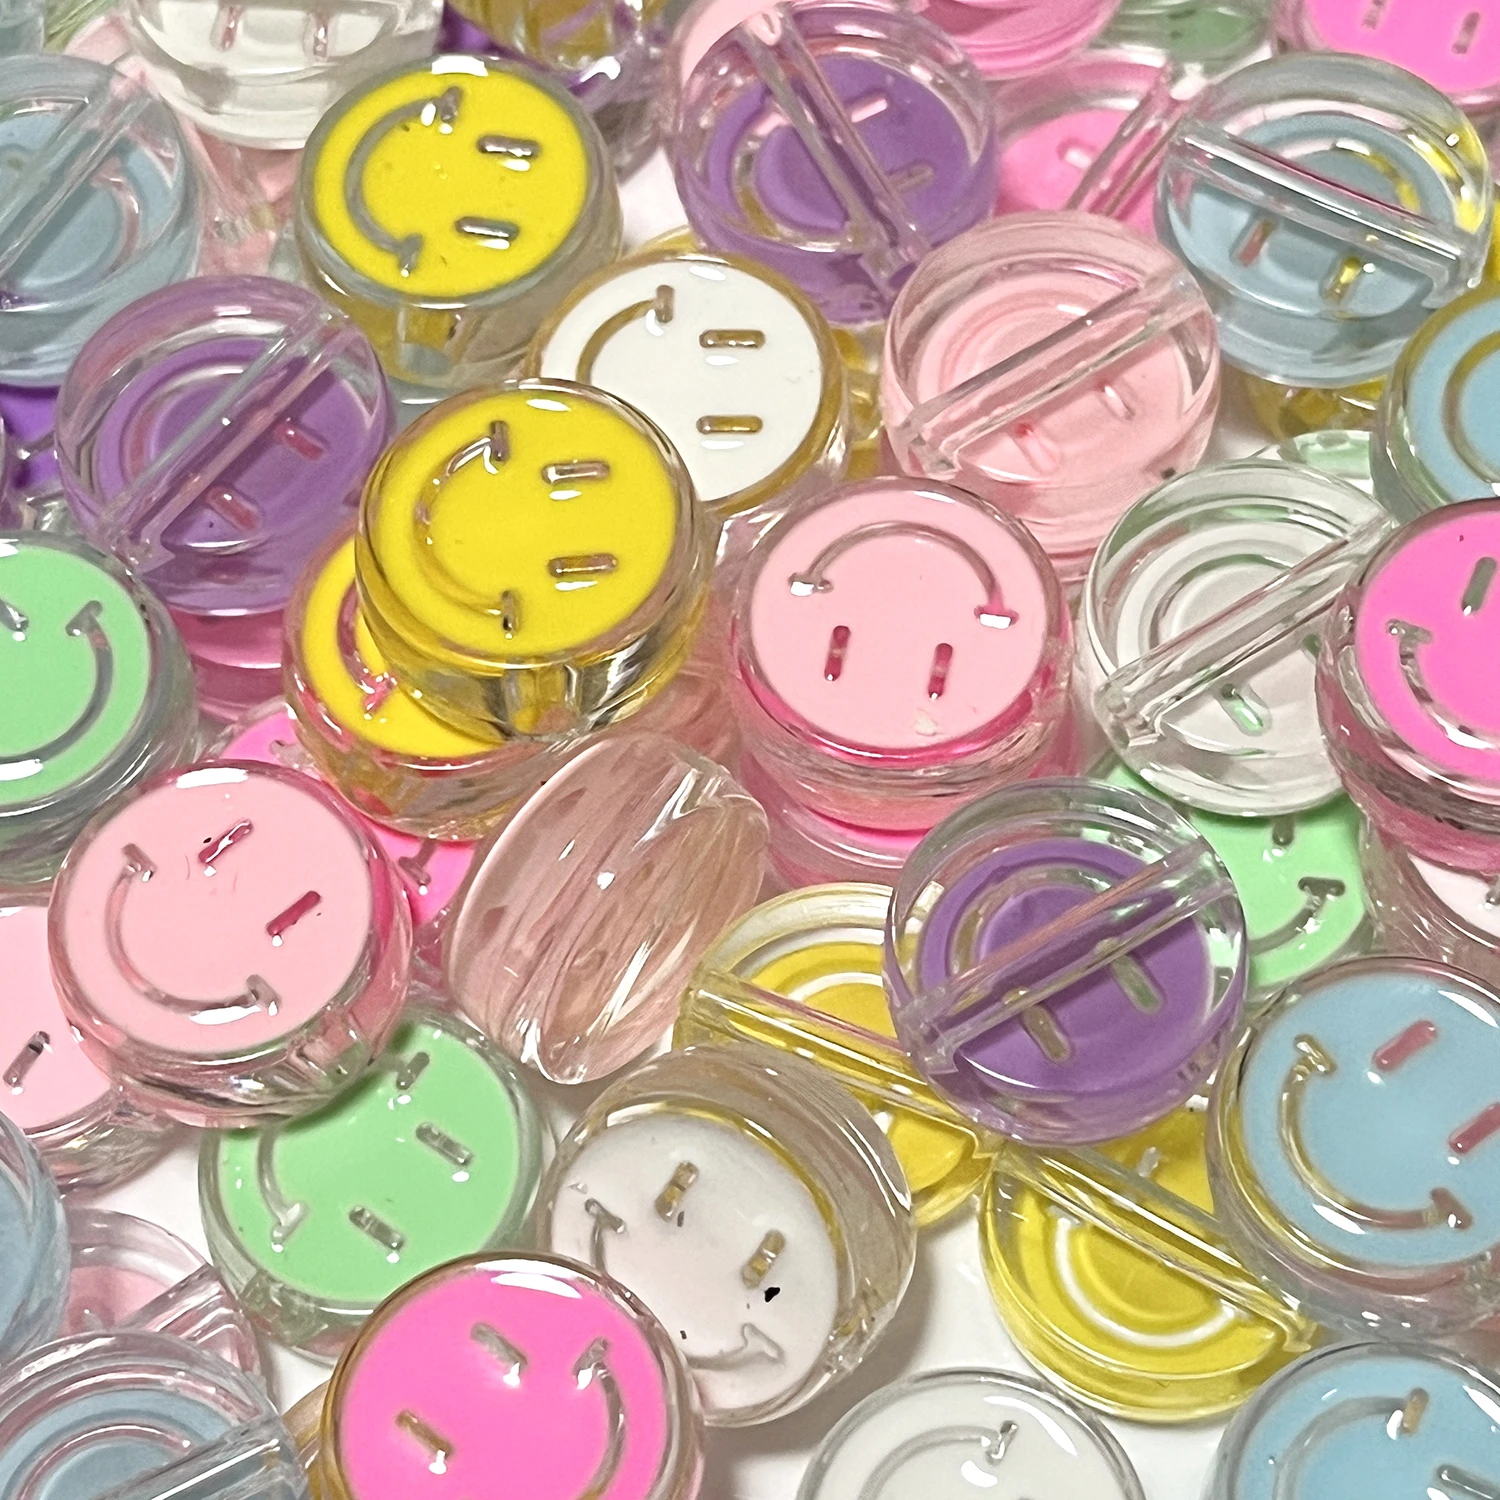 

10pcs/Lot 22mm Smile Face Round Acrylic Beads Big Hole Loose Spacer Beads For Jewelry Making Needlework Diy Key Chains Accessory